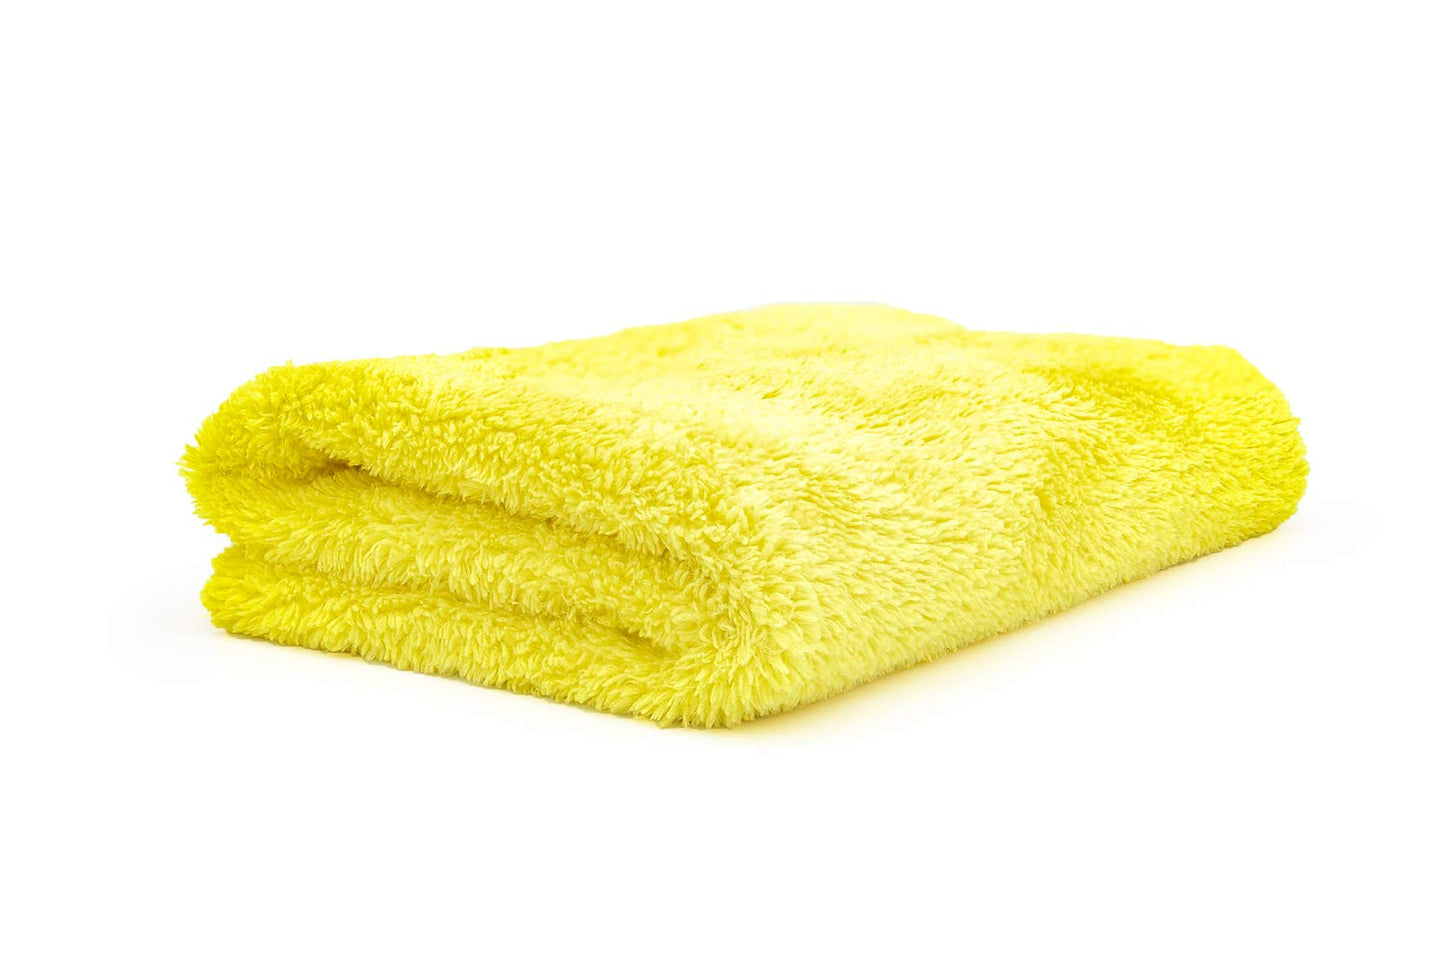 Casey Performance Microfiber Cleaning Cloth - The Yellow Rags, Streak-Free Cleaning  Towels for Car Wash and Housekeeping, Ultra-Absorbent with Cut Edges to  Avoid Scratches (Pack of 5, 16x16) - Yahoo Shopping